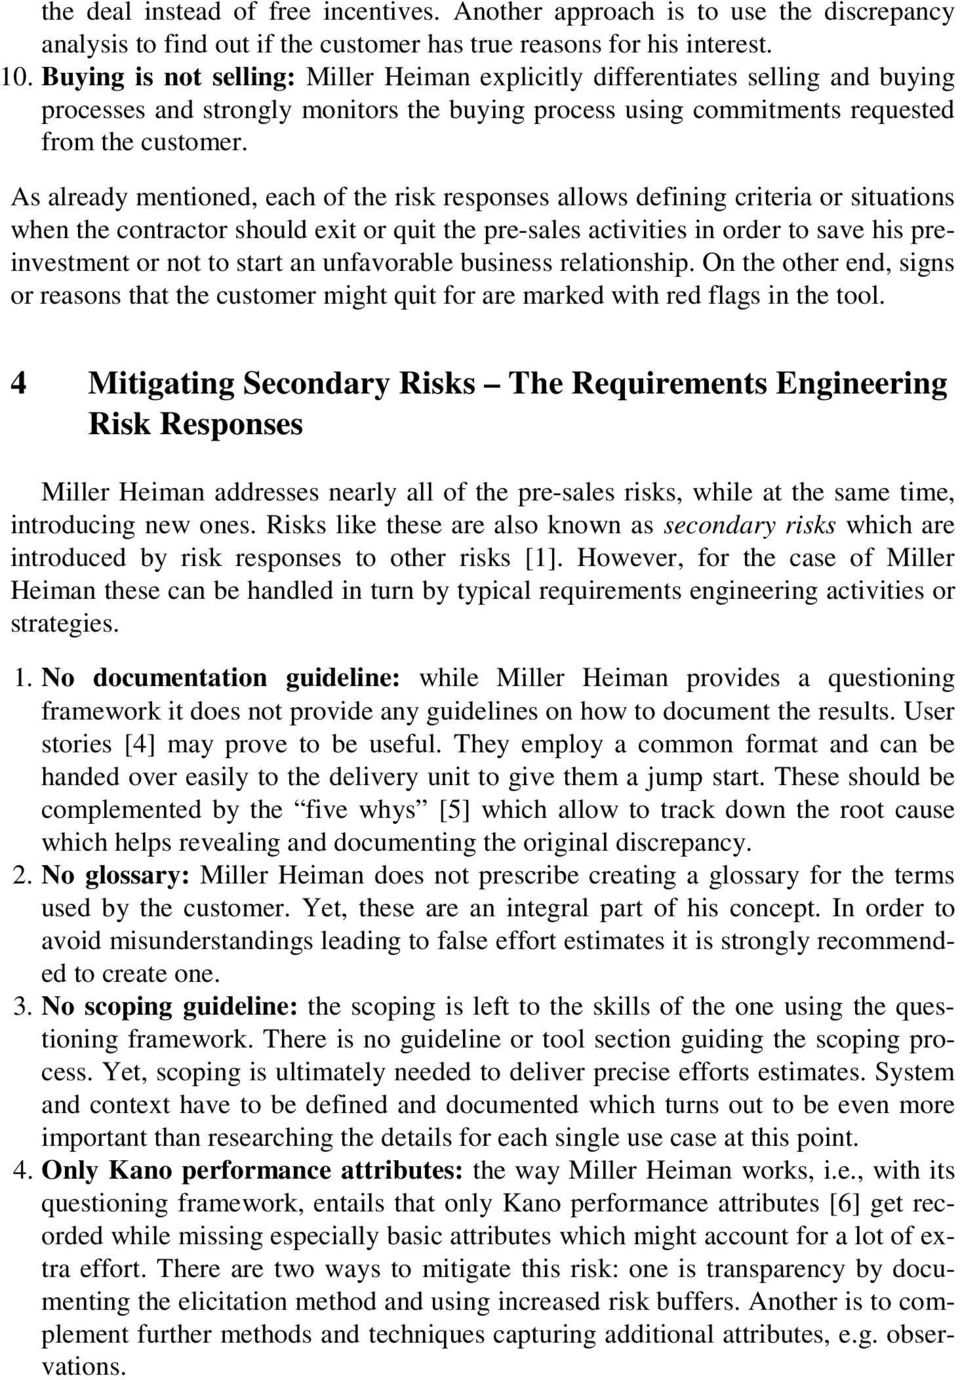 As already mentioned, each of the risk responses allows defining criteria or situations when the contractor should exit or quit the pre-sales activities in order to save his preinvestment or not to